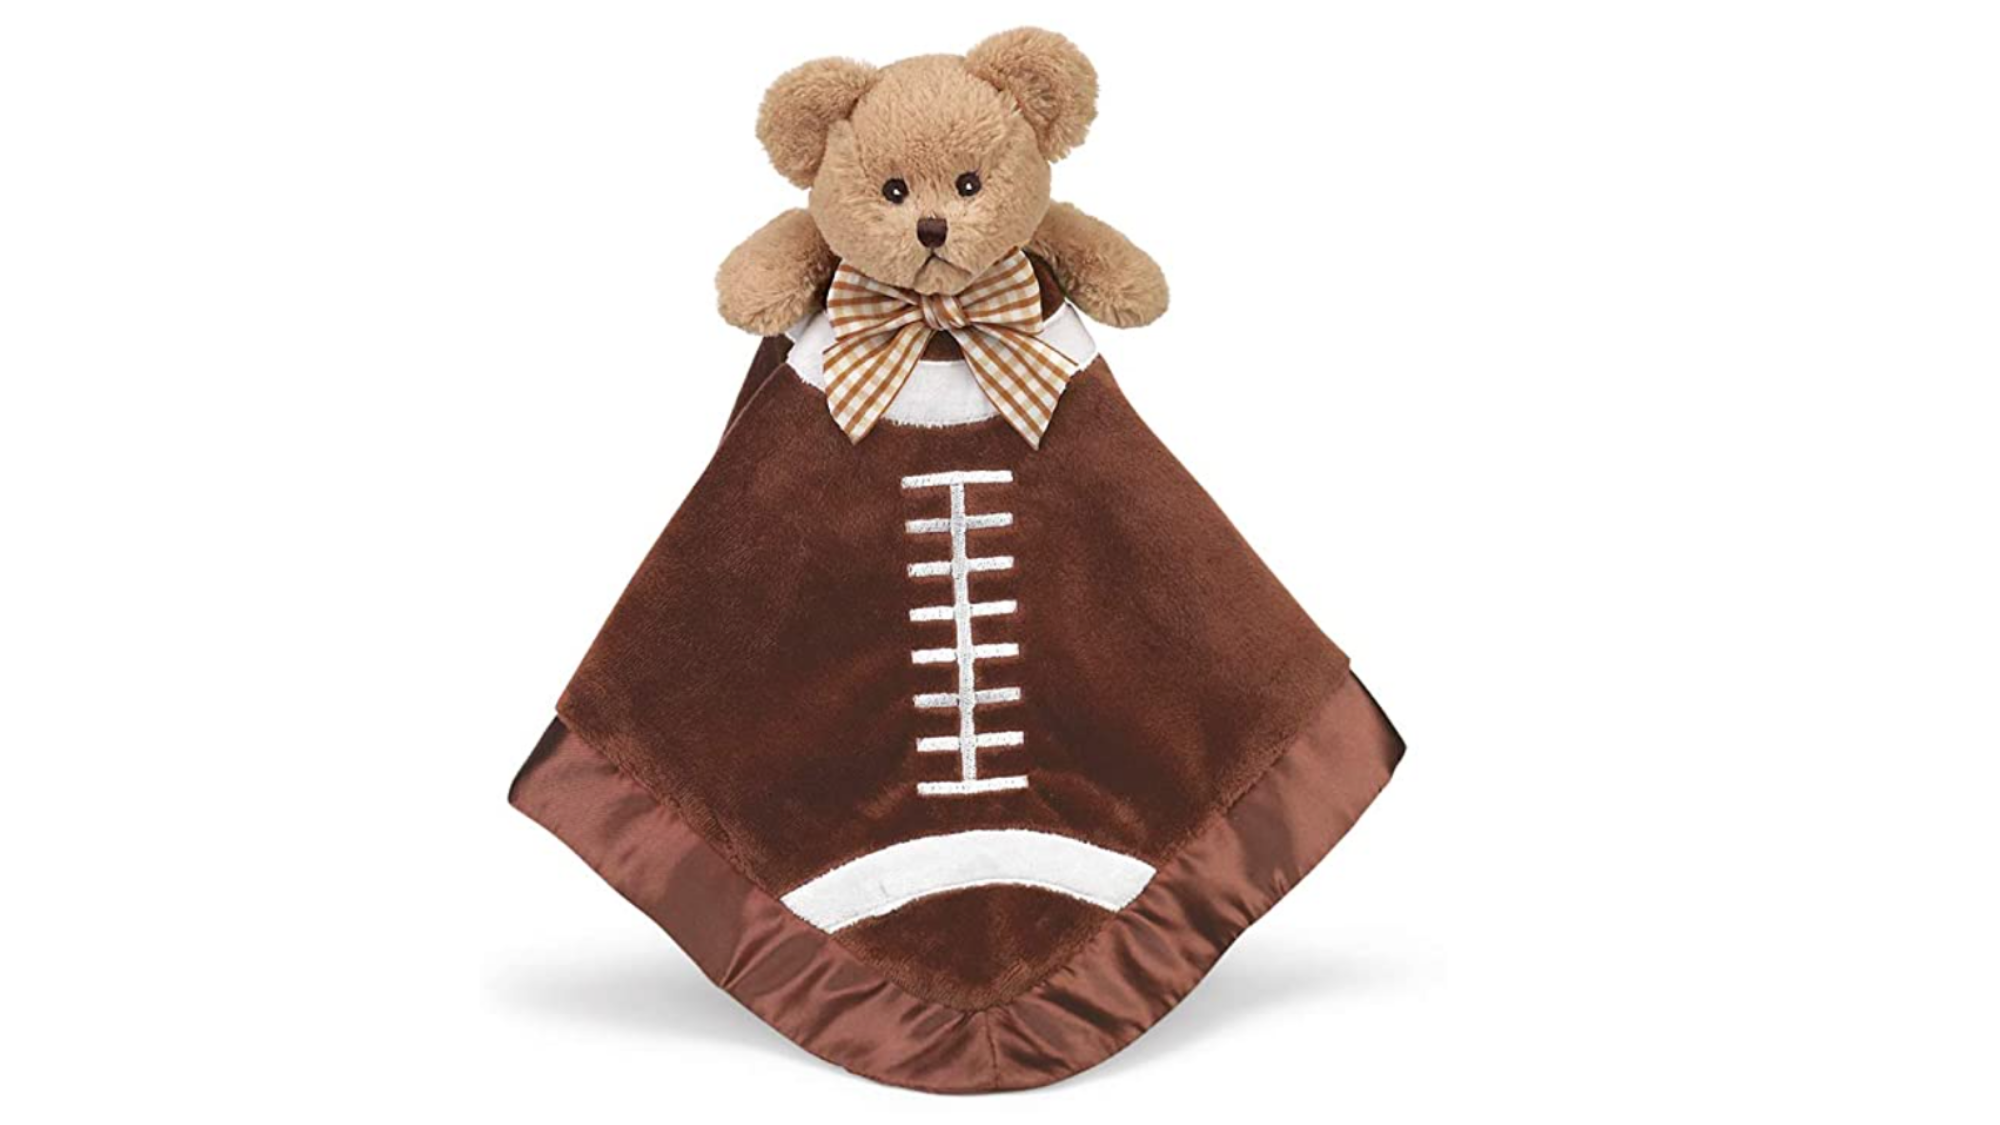 First Super Bowl outfits and toys: A cuddly lovey